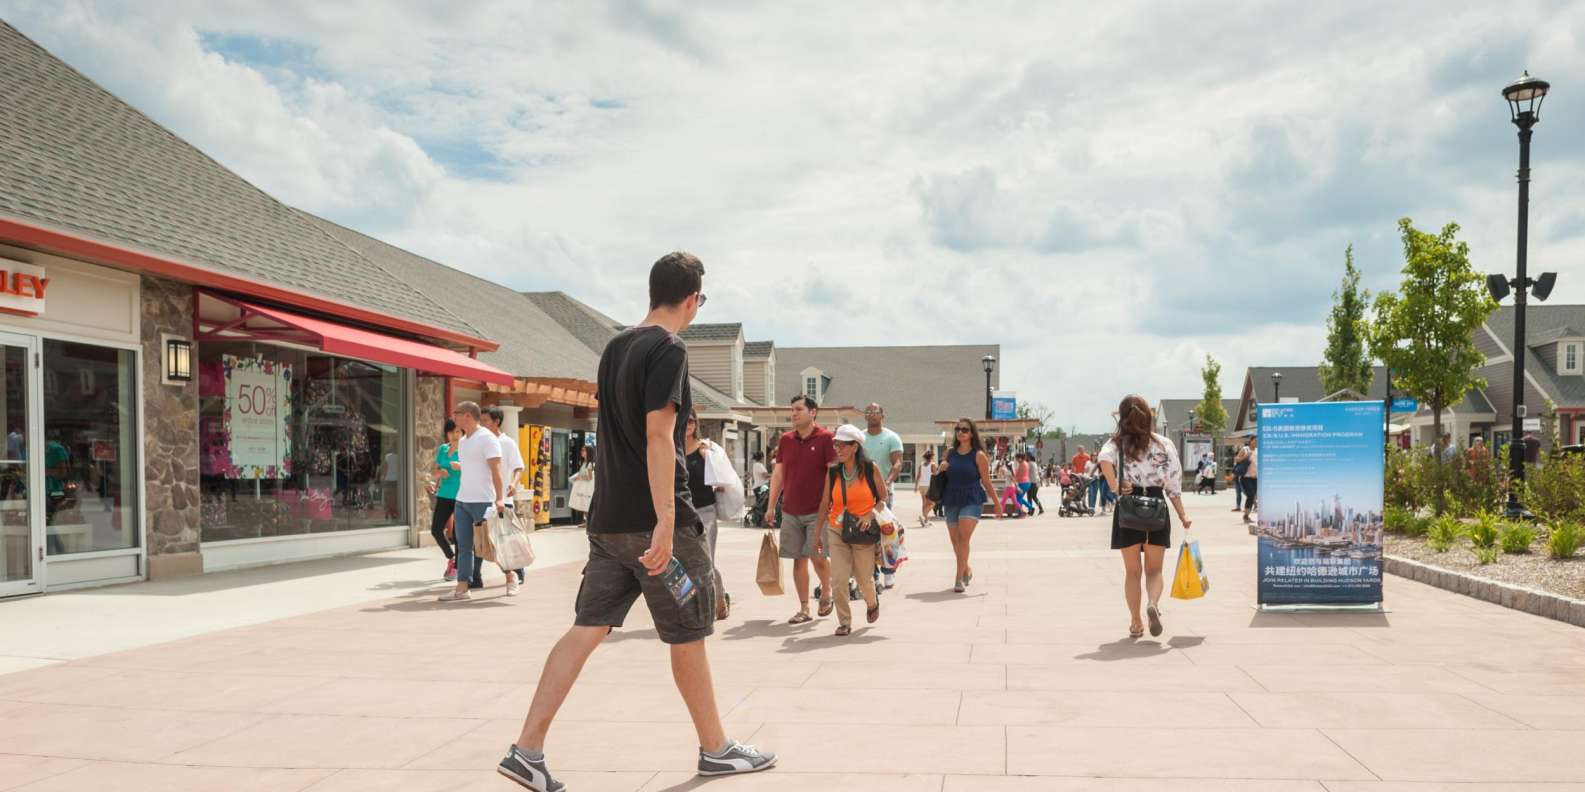 Shopping Excursion to the Outlets New York - Book at